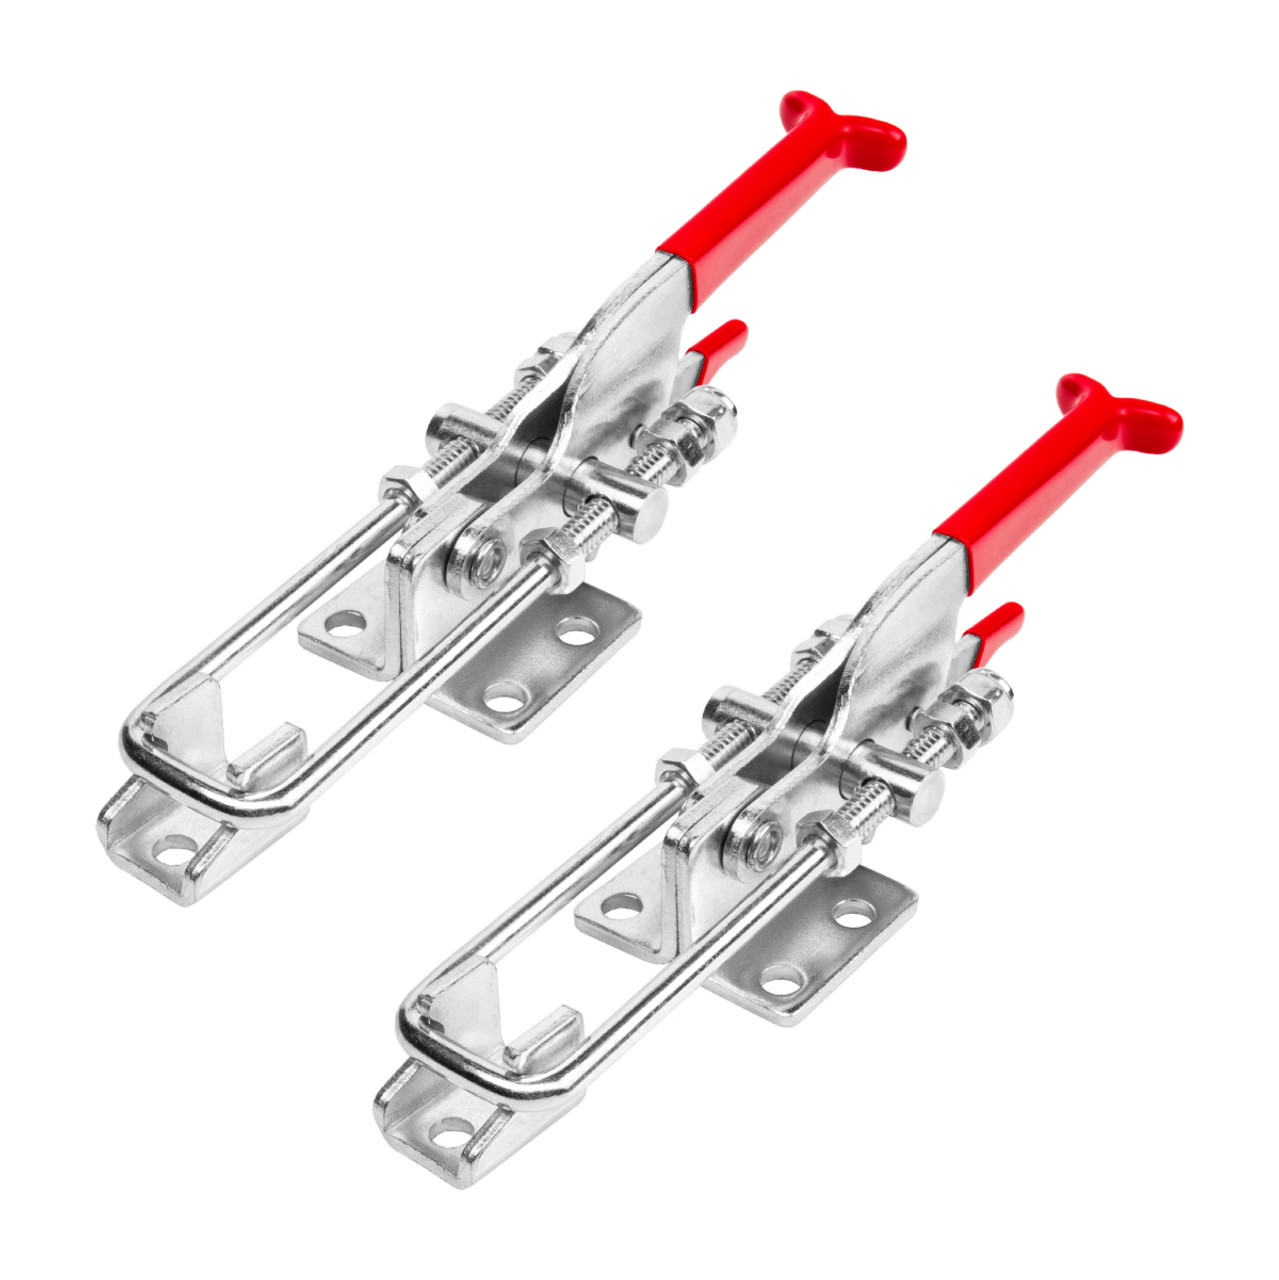 POWERTEC 20341 Heavy Duty Adjustable Latch-Action U Bolt Self-Lock Toggle Clamp 431-700 lbs Holding Capacity, 2pk, Red